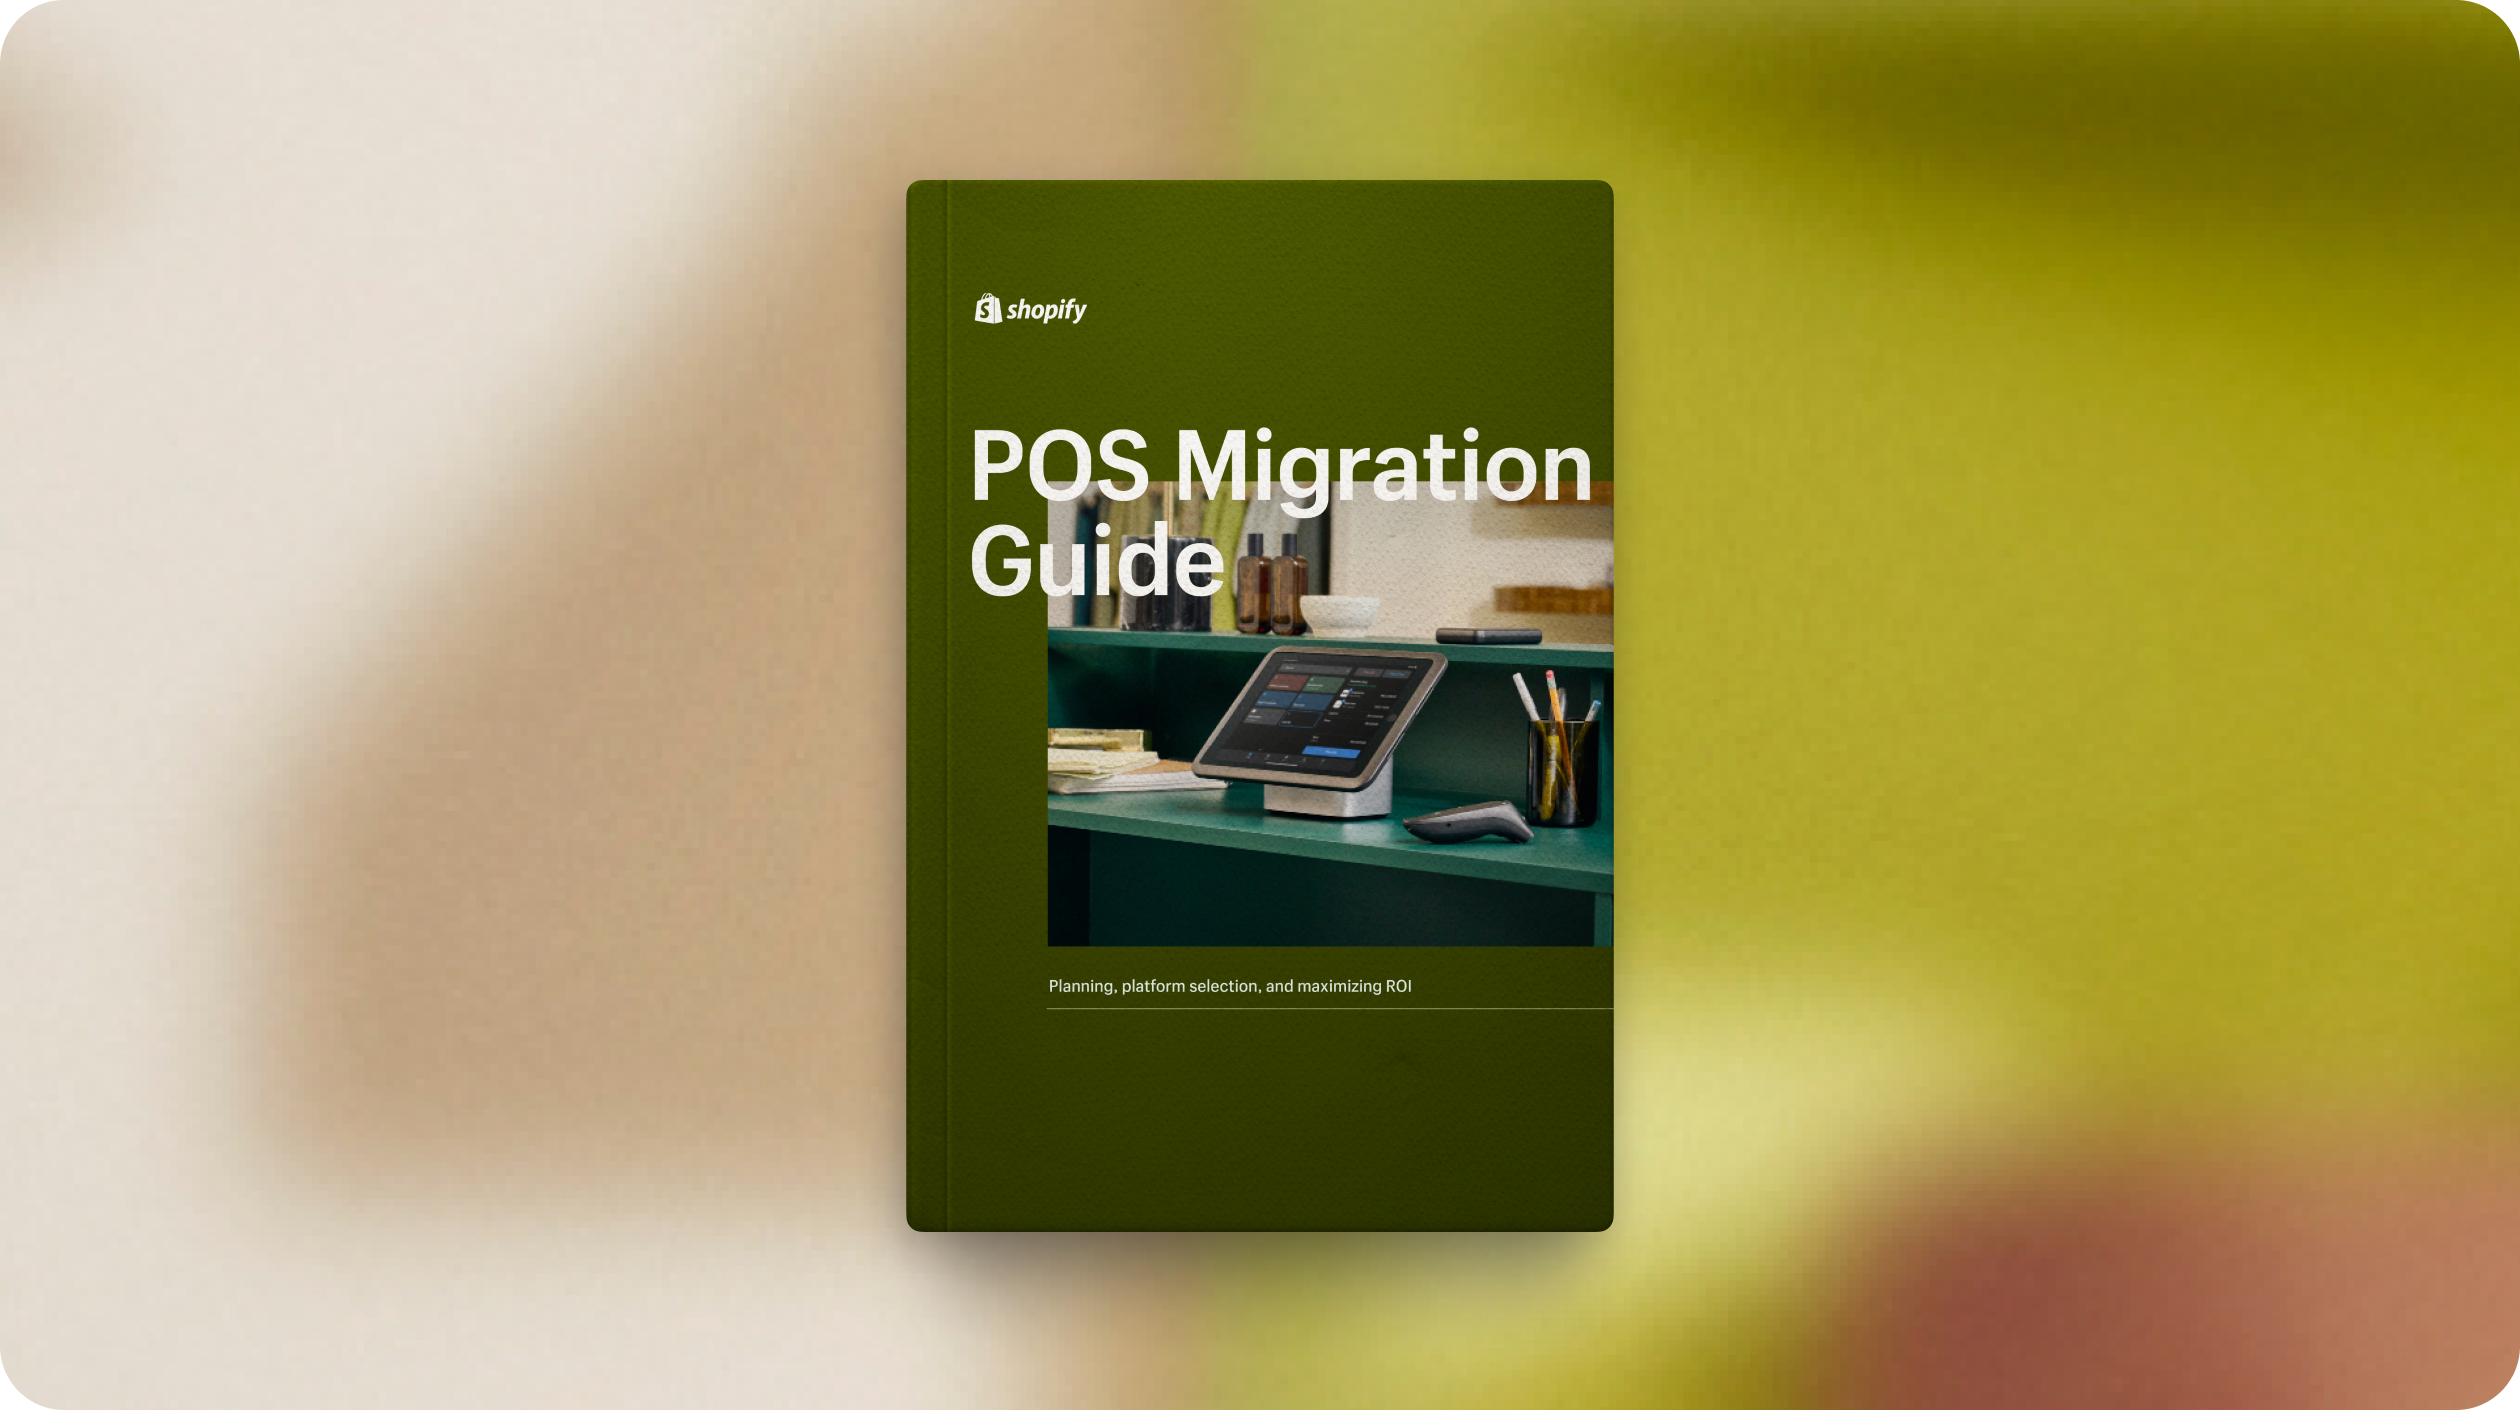 The POS Migration Guide sits against a backdrop.